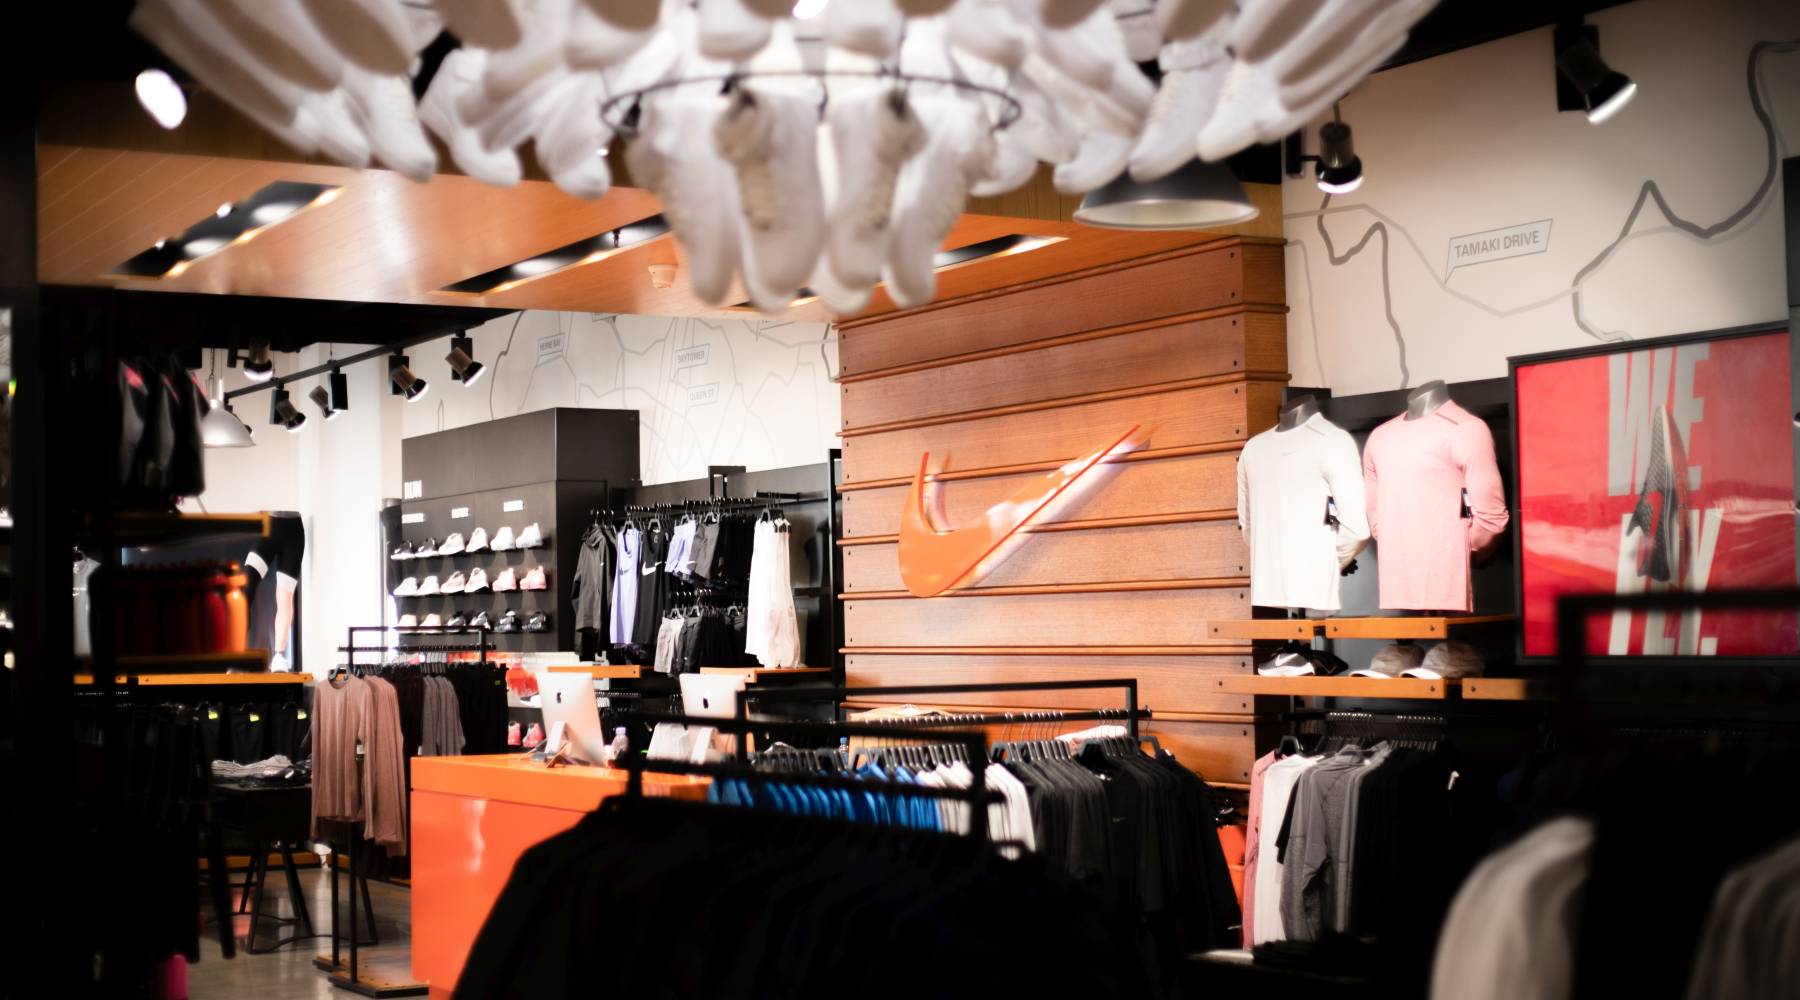 nike store usa outlet